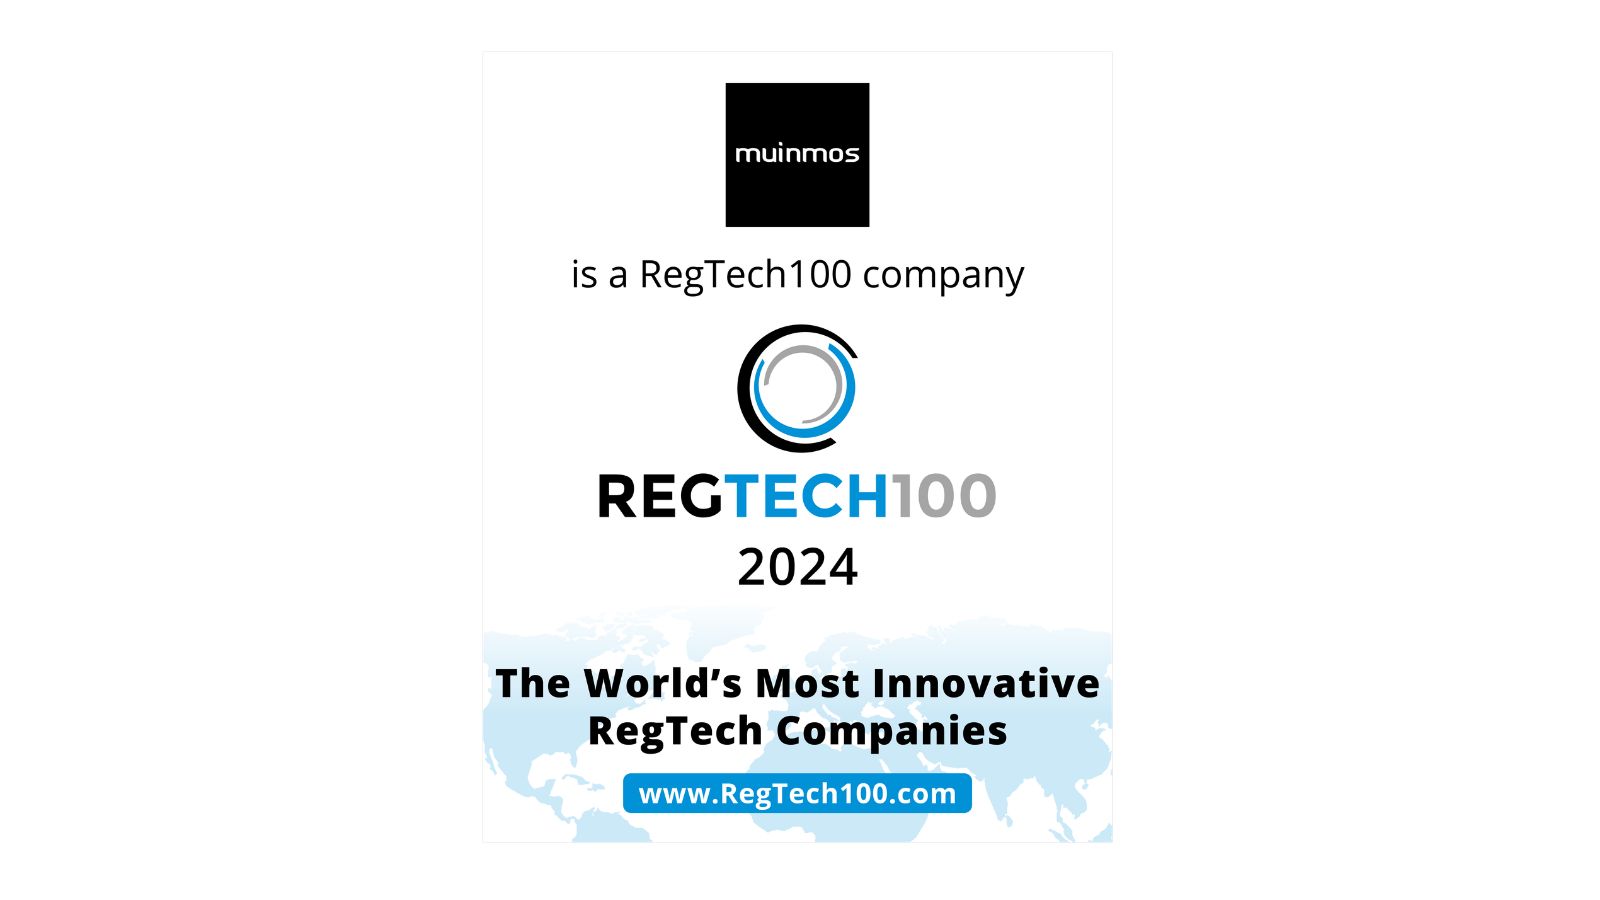 Muinmos Selected for Prestigious RegTech 100 List for Seventh Consecutive Year